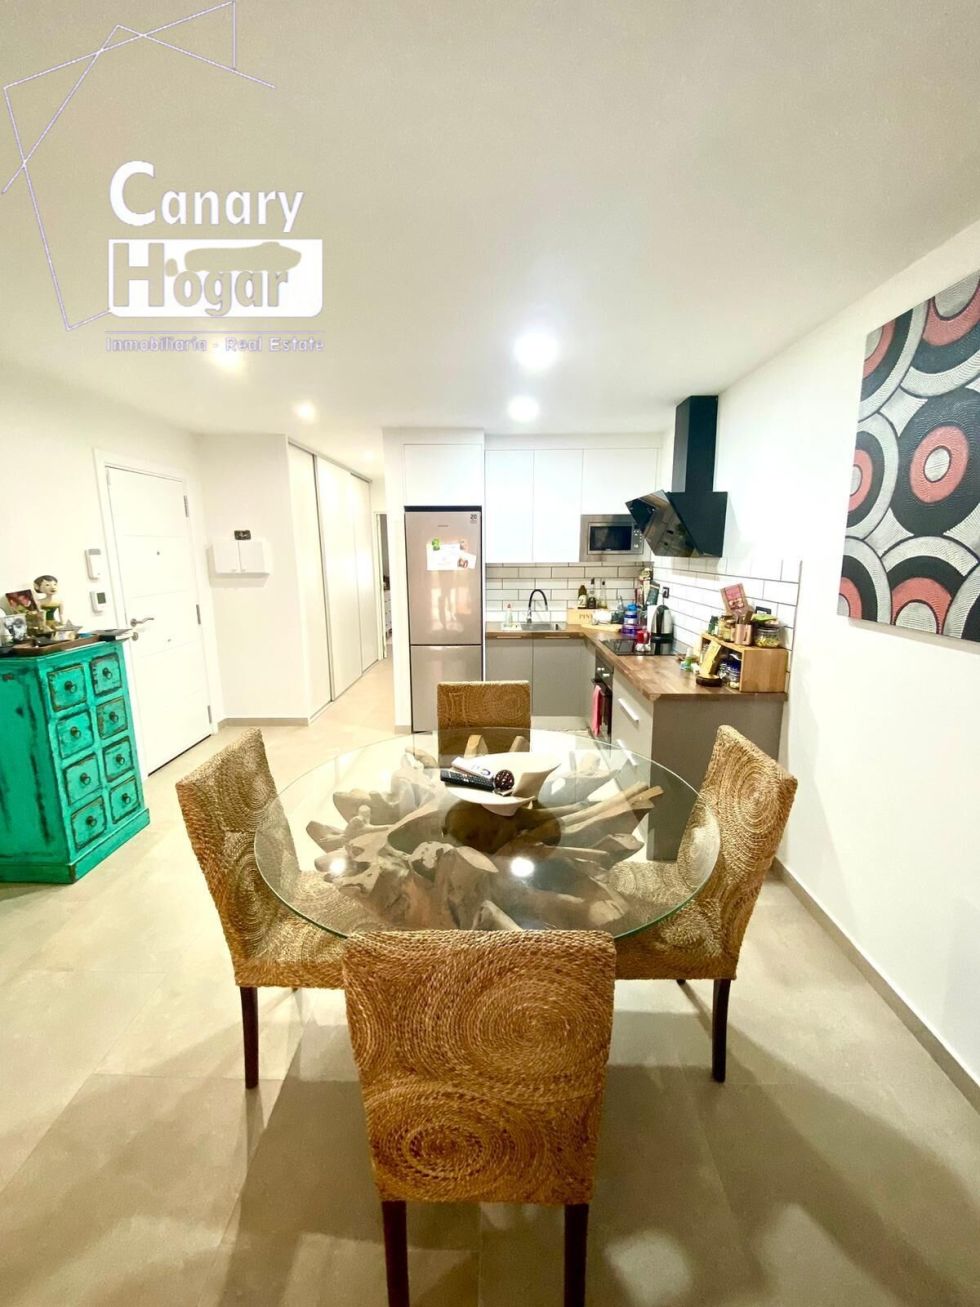 Flat for sale in  Chayofa, Spain - 054231